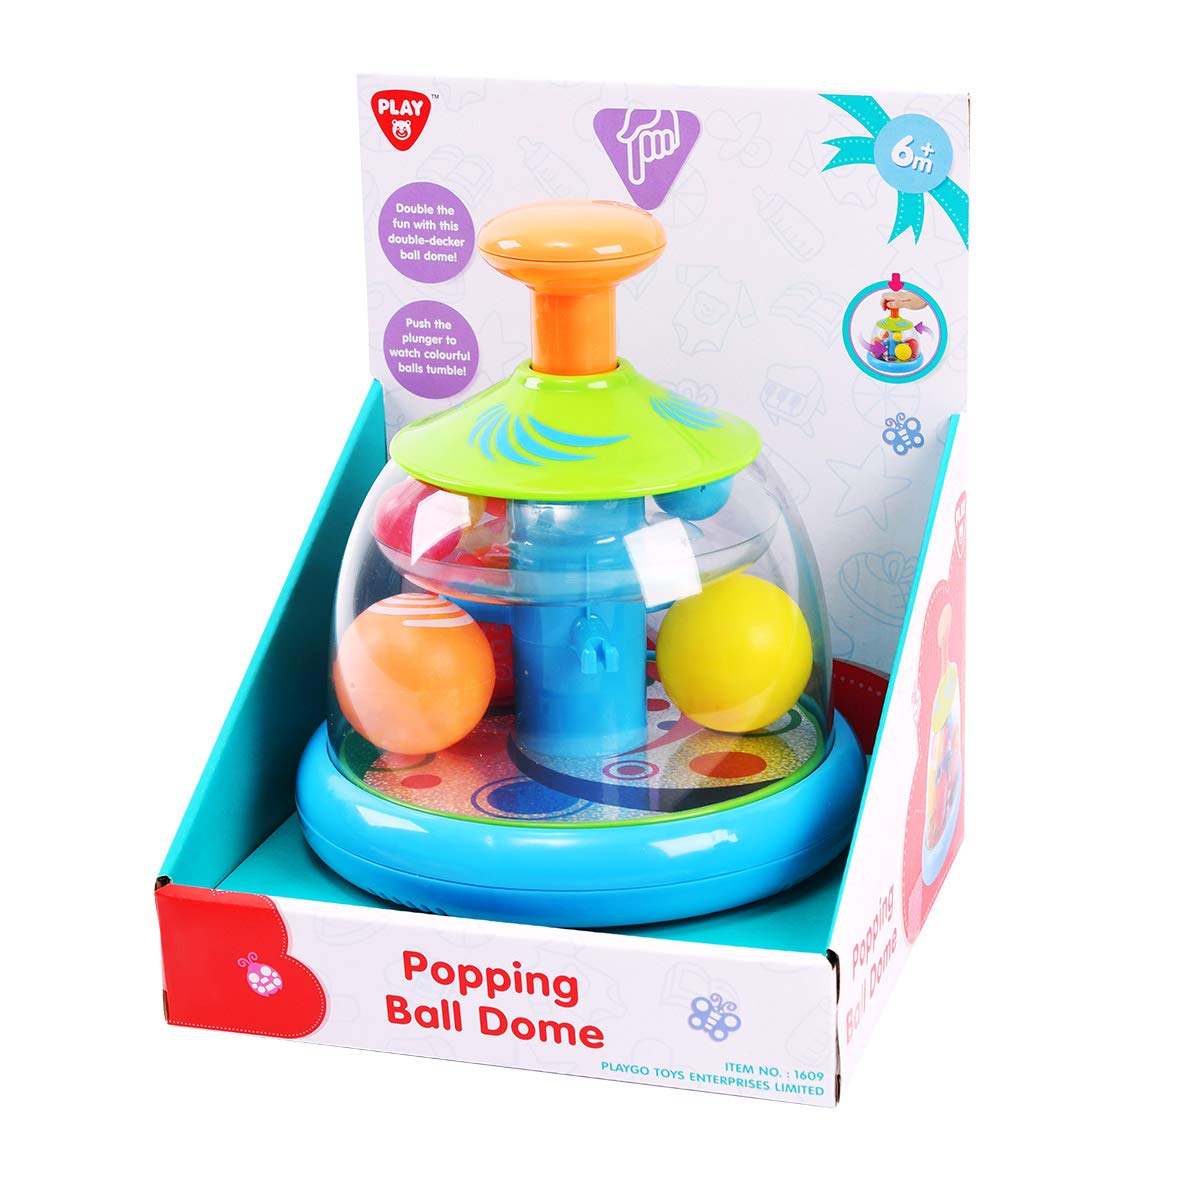 Play Popping Ball Dome Toy - Ball Popper Toys Tumble Top - Spinning Popping Make Colorful Balls Pop and Fly - Gift for 6 Month Plus Newborn Babies Infants, 1609